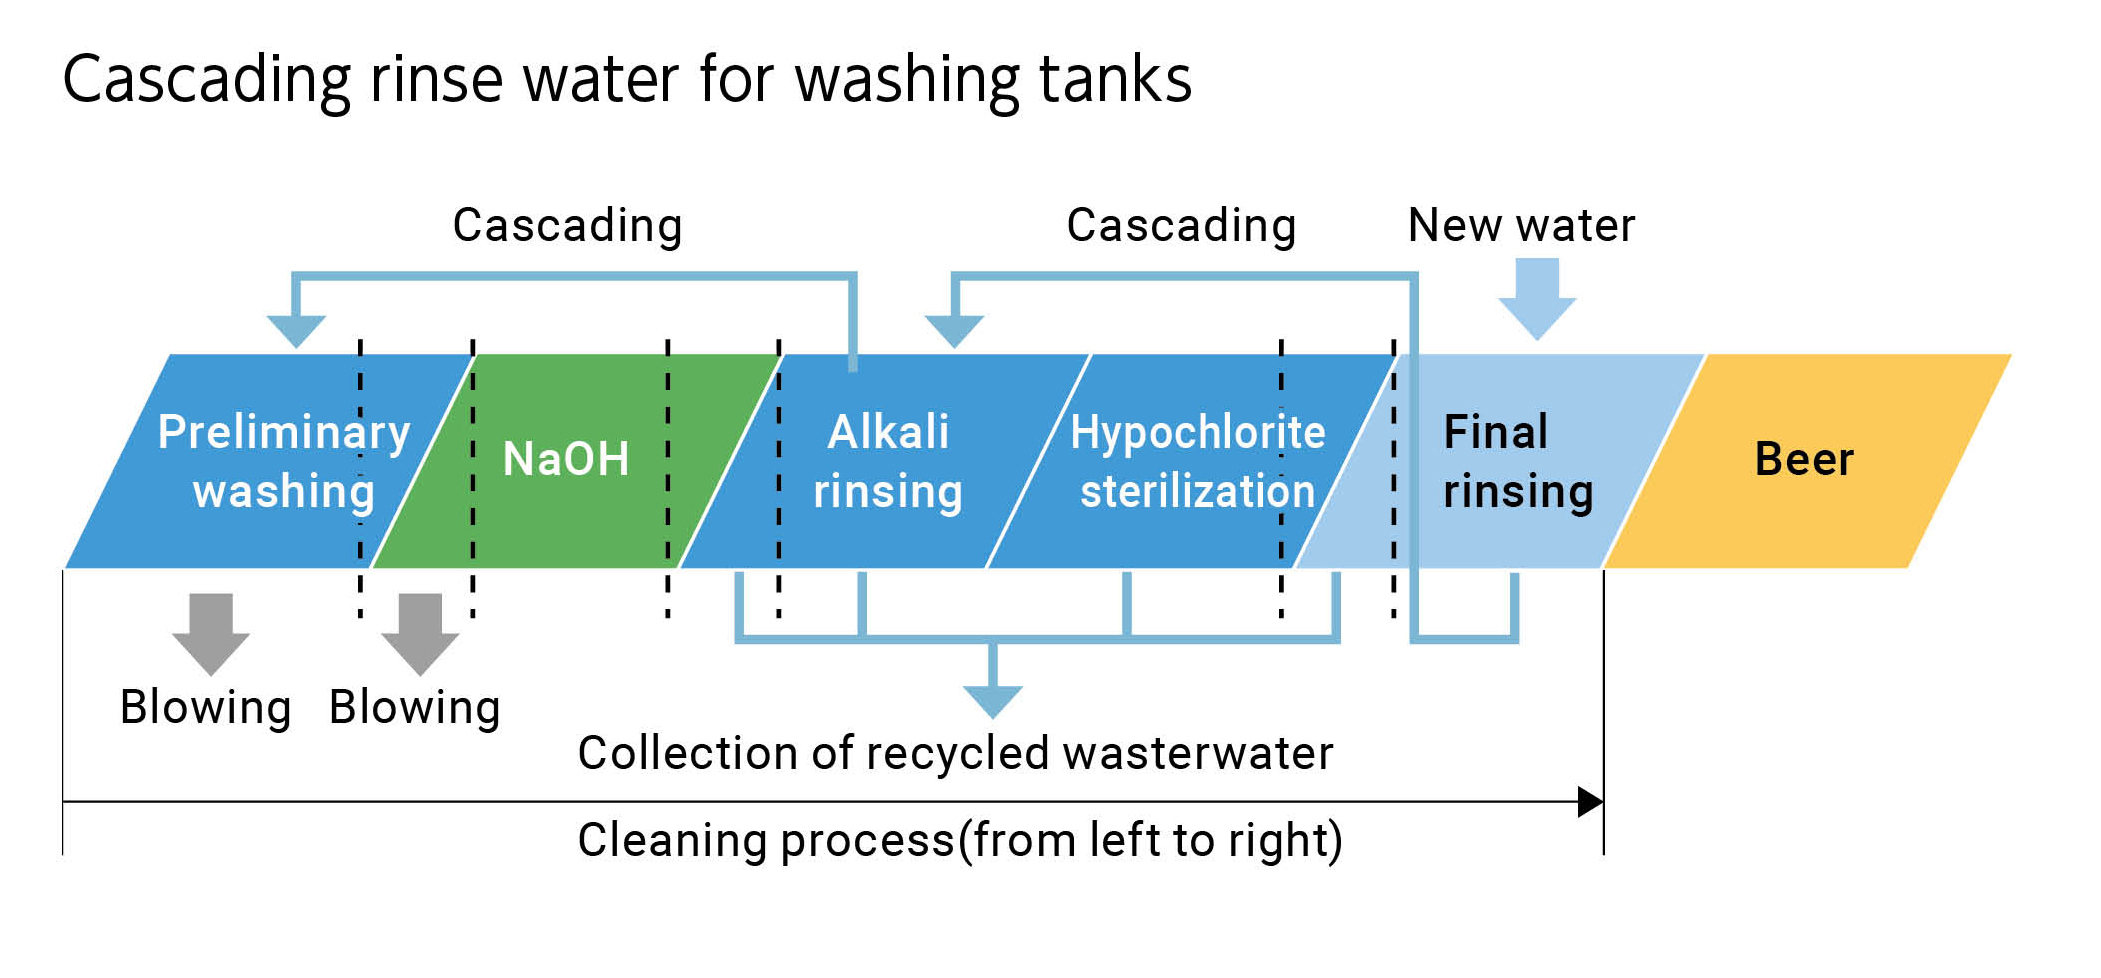 Cascading rinse water for washing tanks